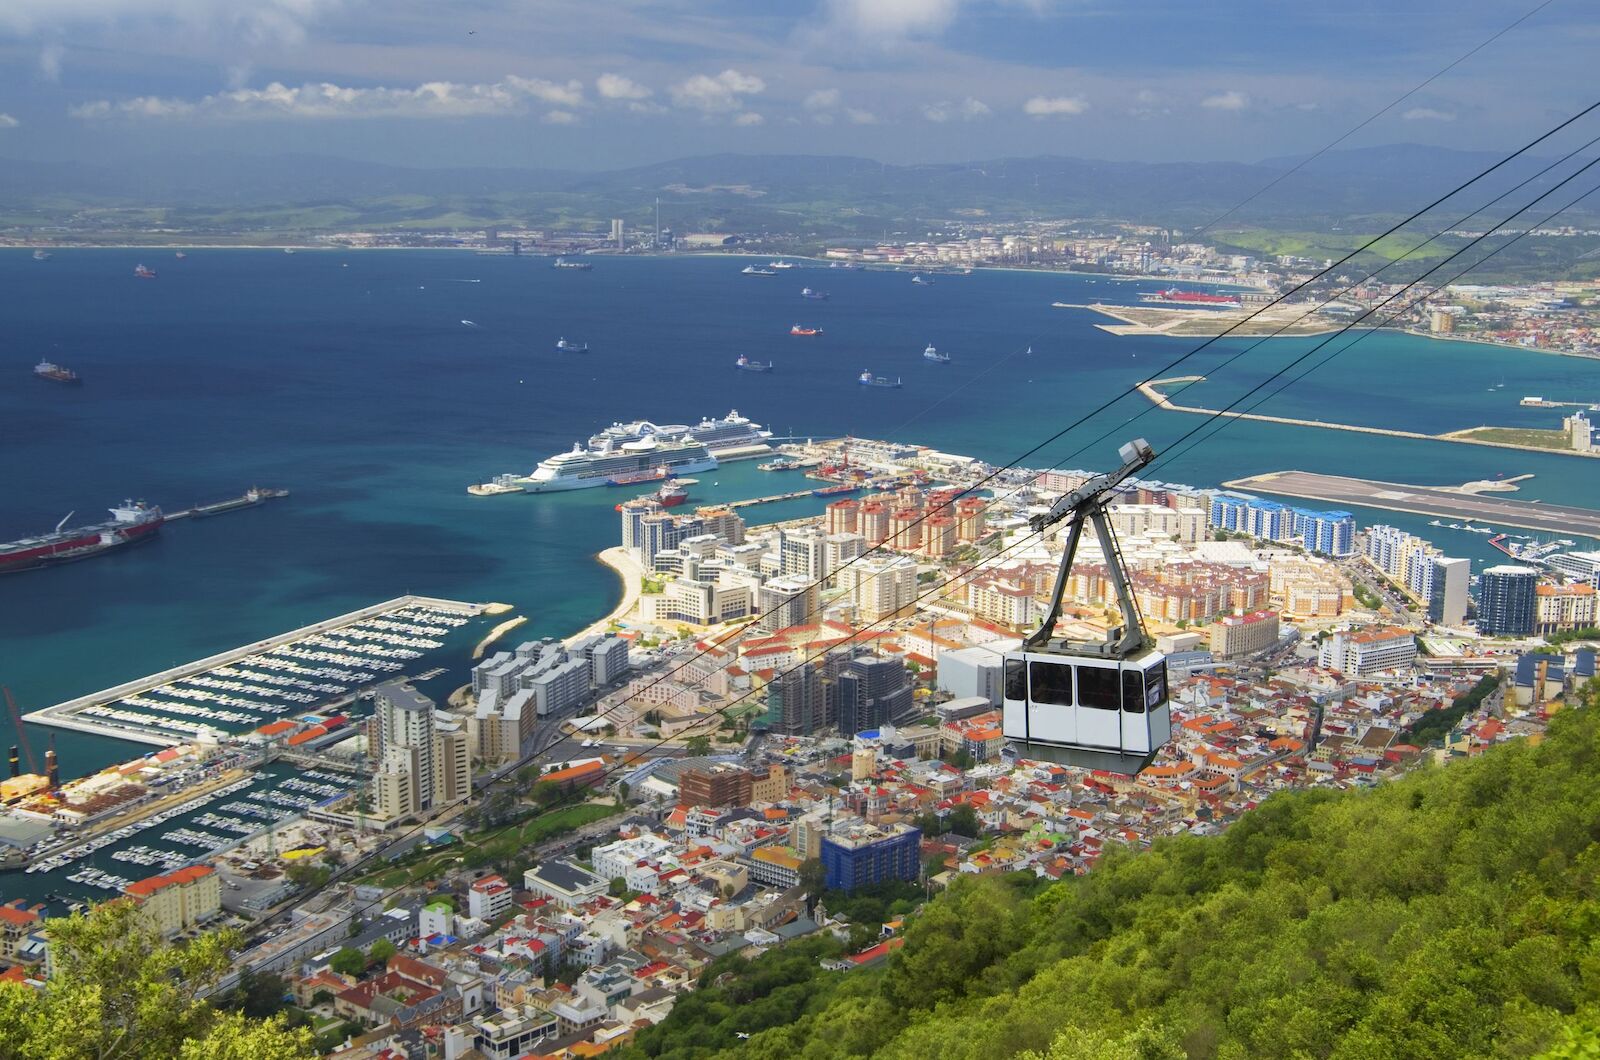 Cable car in Gibraltar